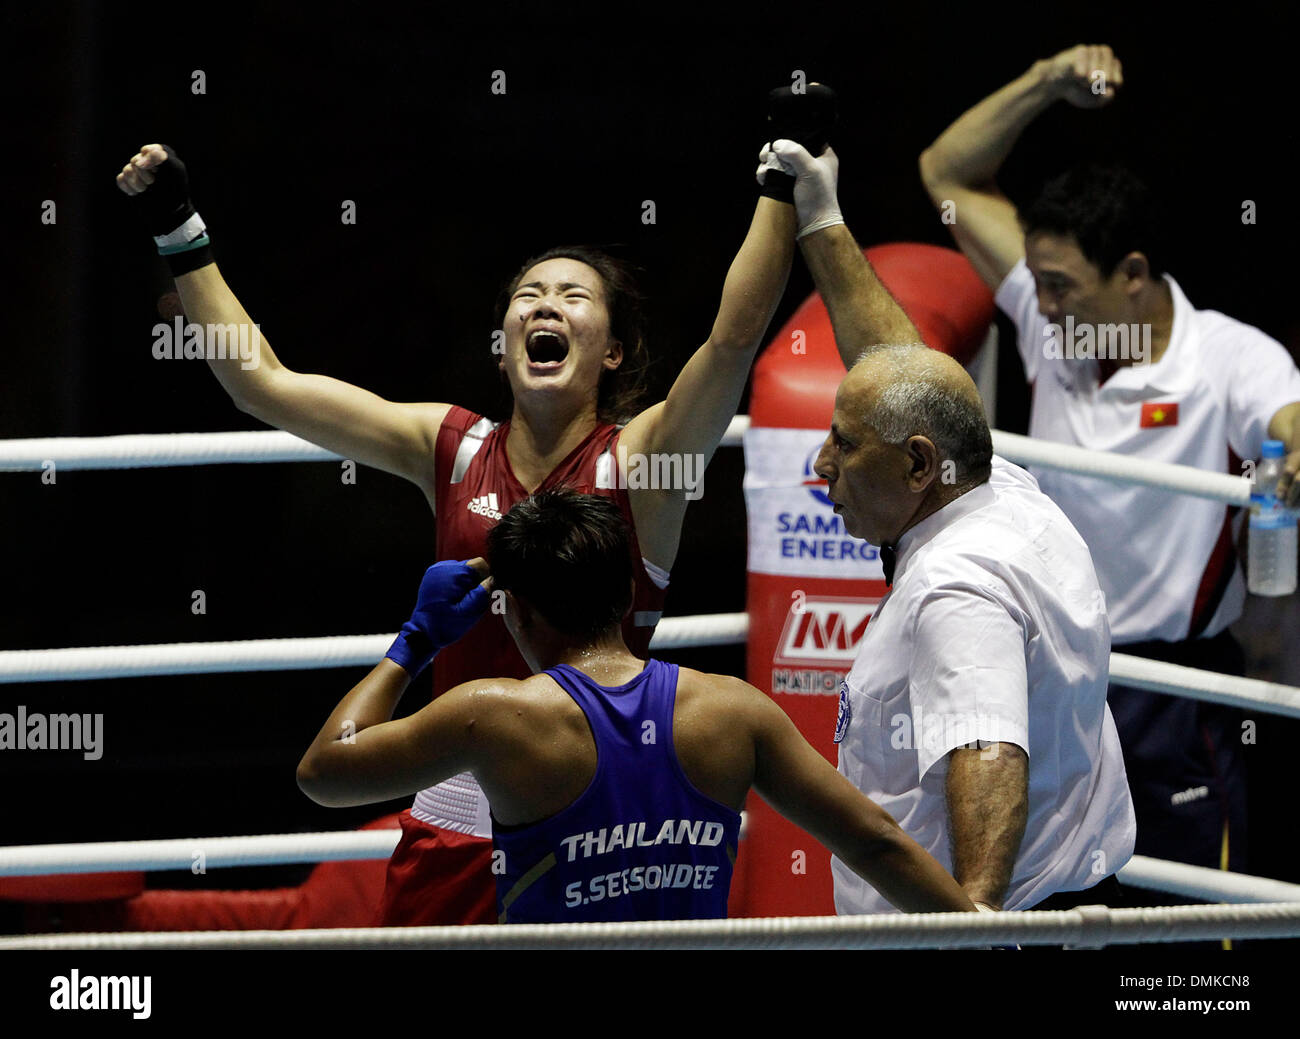 Nay Pyi Taw, Myanmar. 15th Dec, 2013. Lvv Thi Duyen (above L) of Vietnam celebrate as she won the fight against Sudaporan Sees of Thailand during the women's 60 kg boxing match of 27th SEA Games at Nay Pyi Taw's Wunna Theikdi Indoor Stadium, Myanmar, Dec. 14, 2013. Lvv Thi Duyen won the match and gold medal. Credit:  Thet Htoo/Xinhua/Alamy Live News Stock Photo